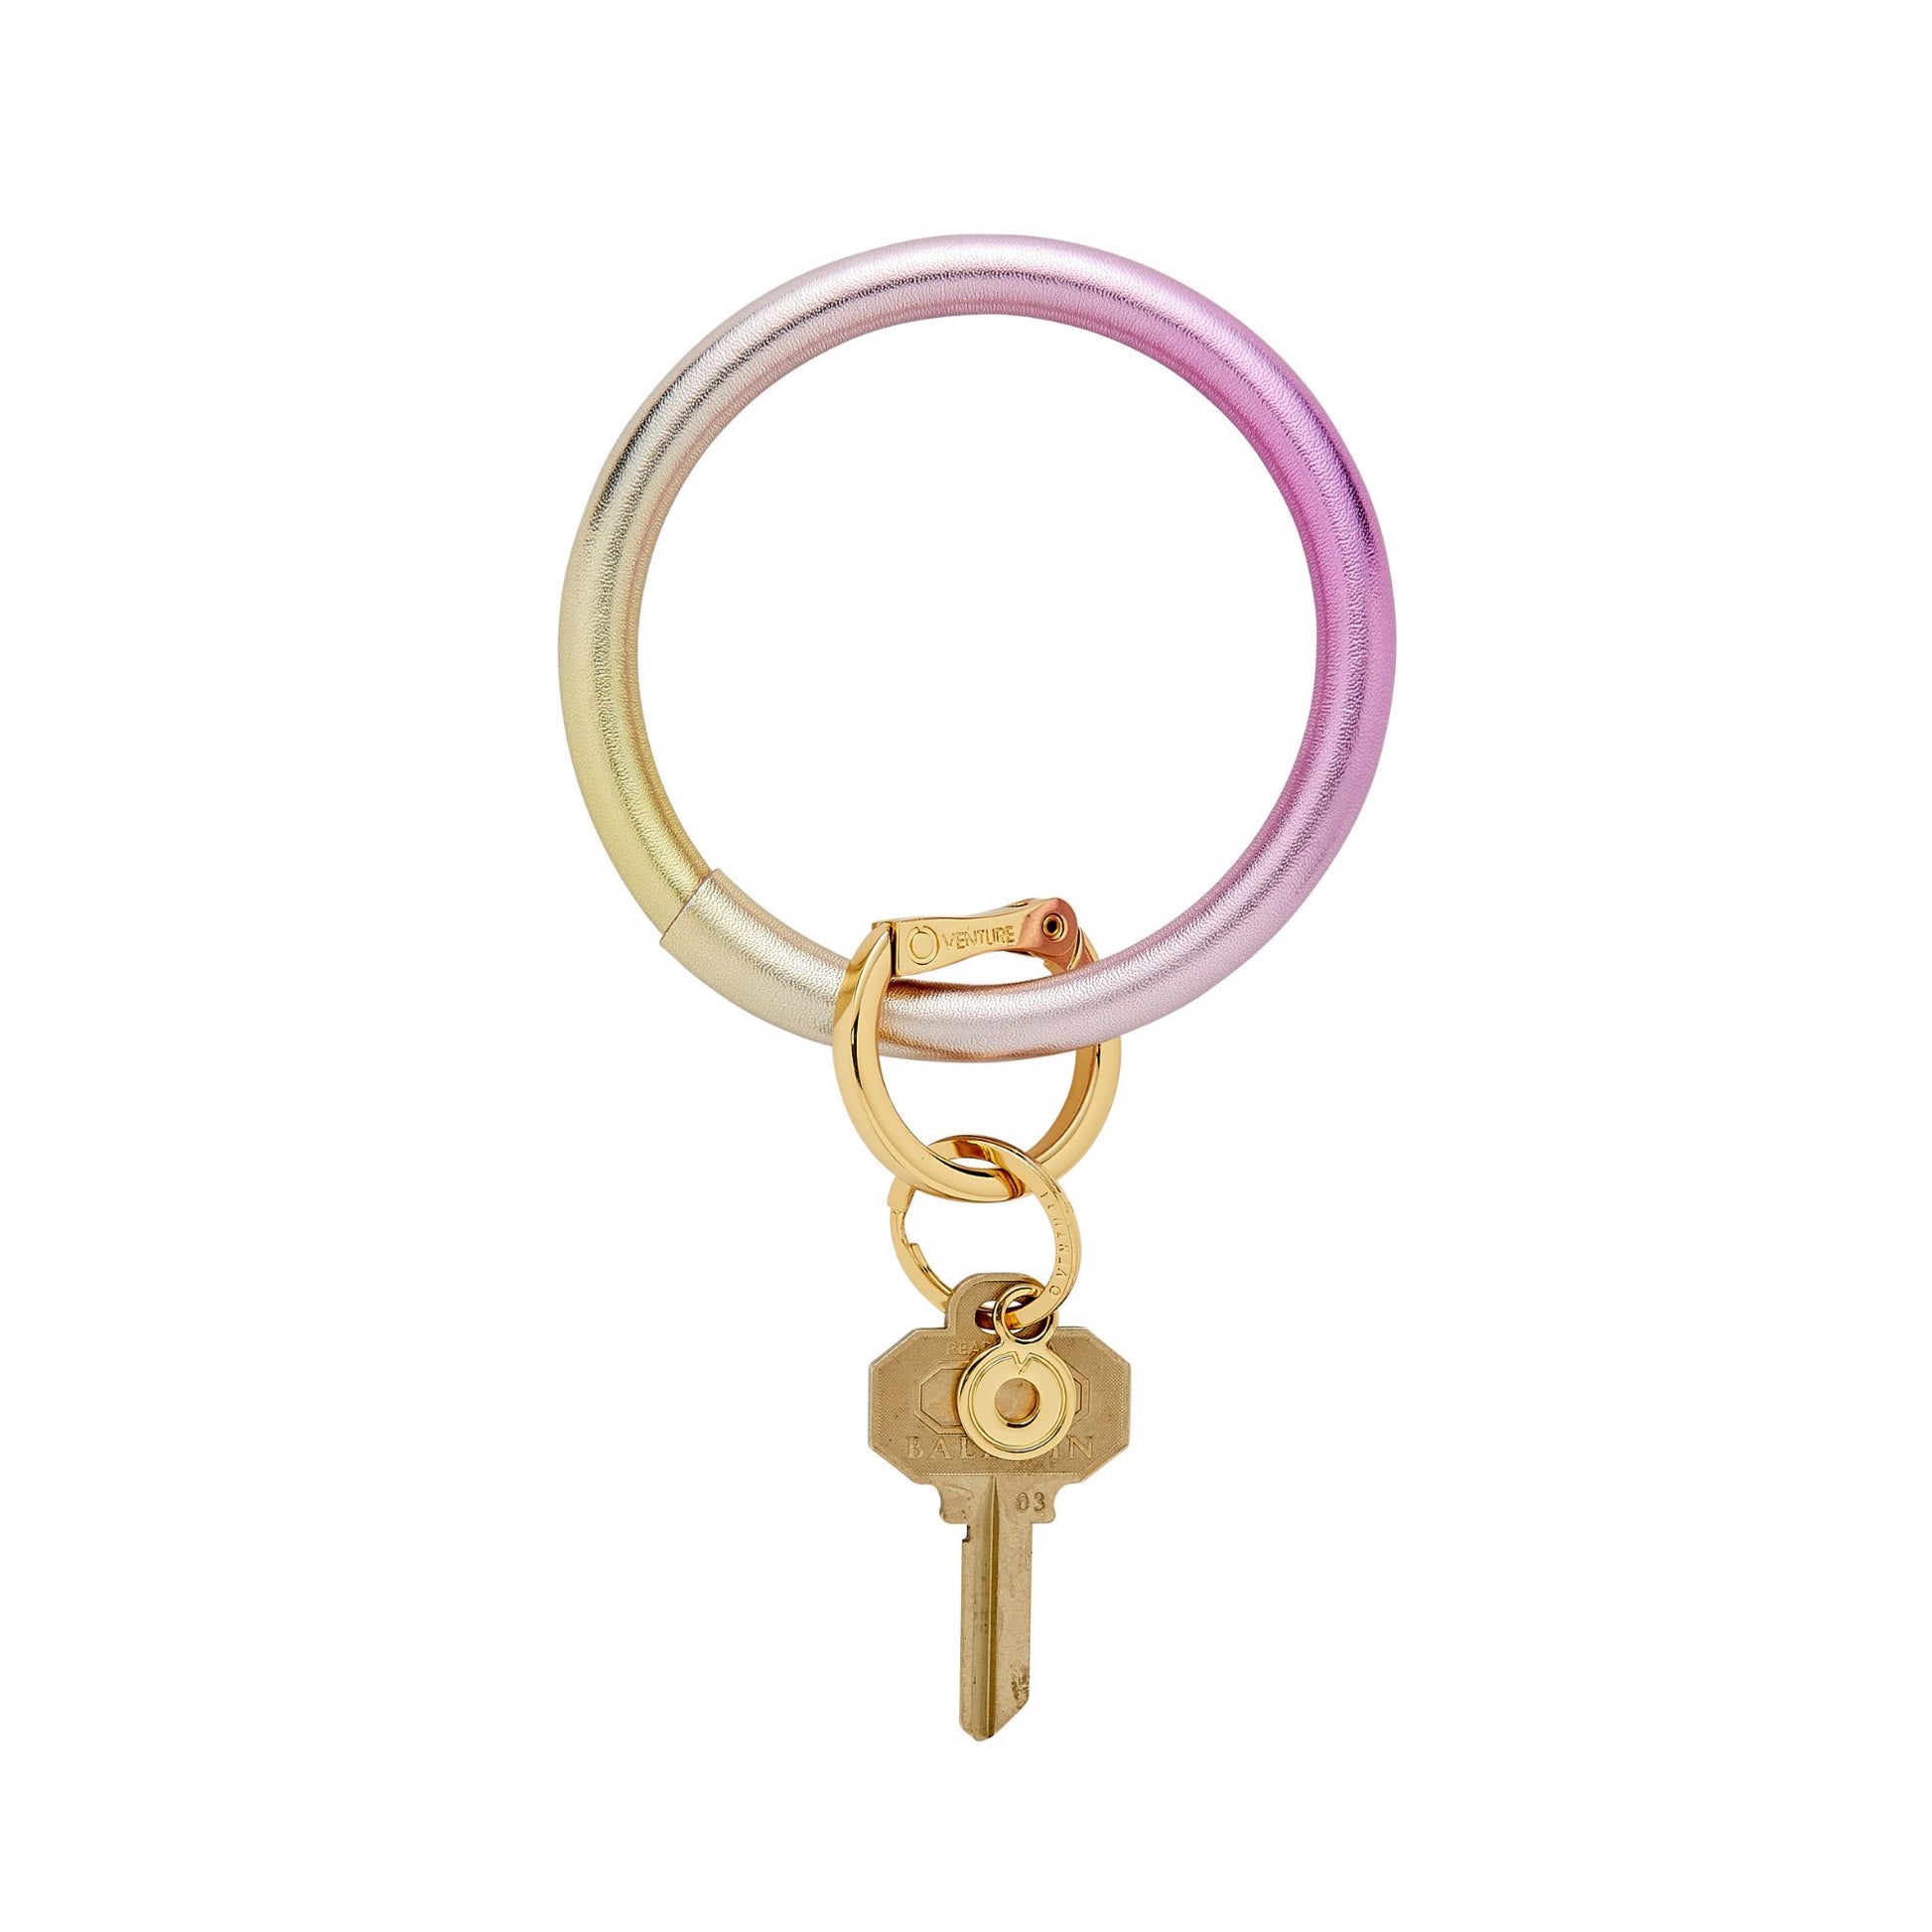 Back side of the leather big o keyring in ombre leather with gold hardware